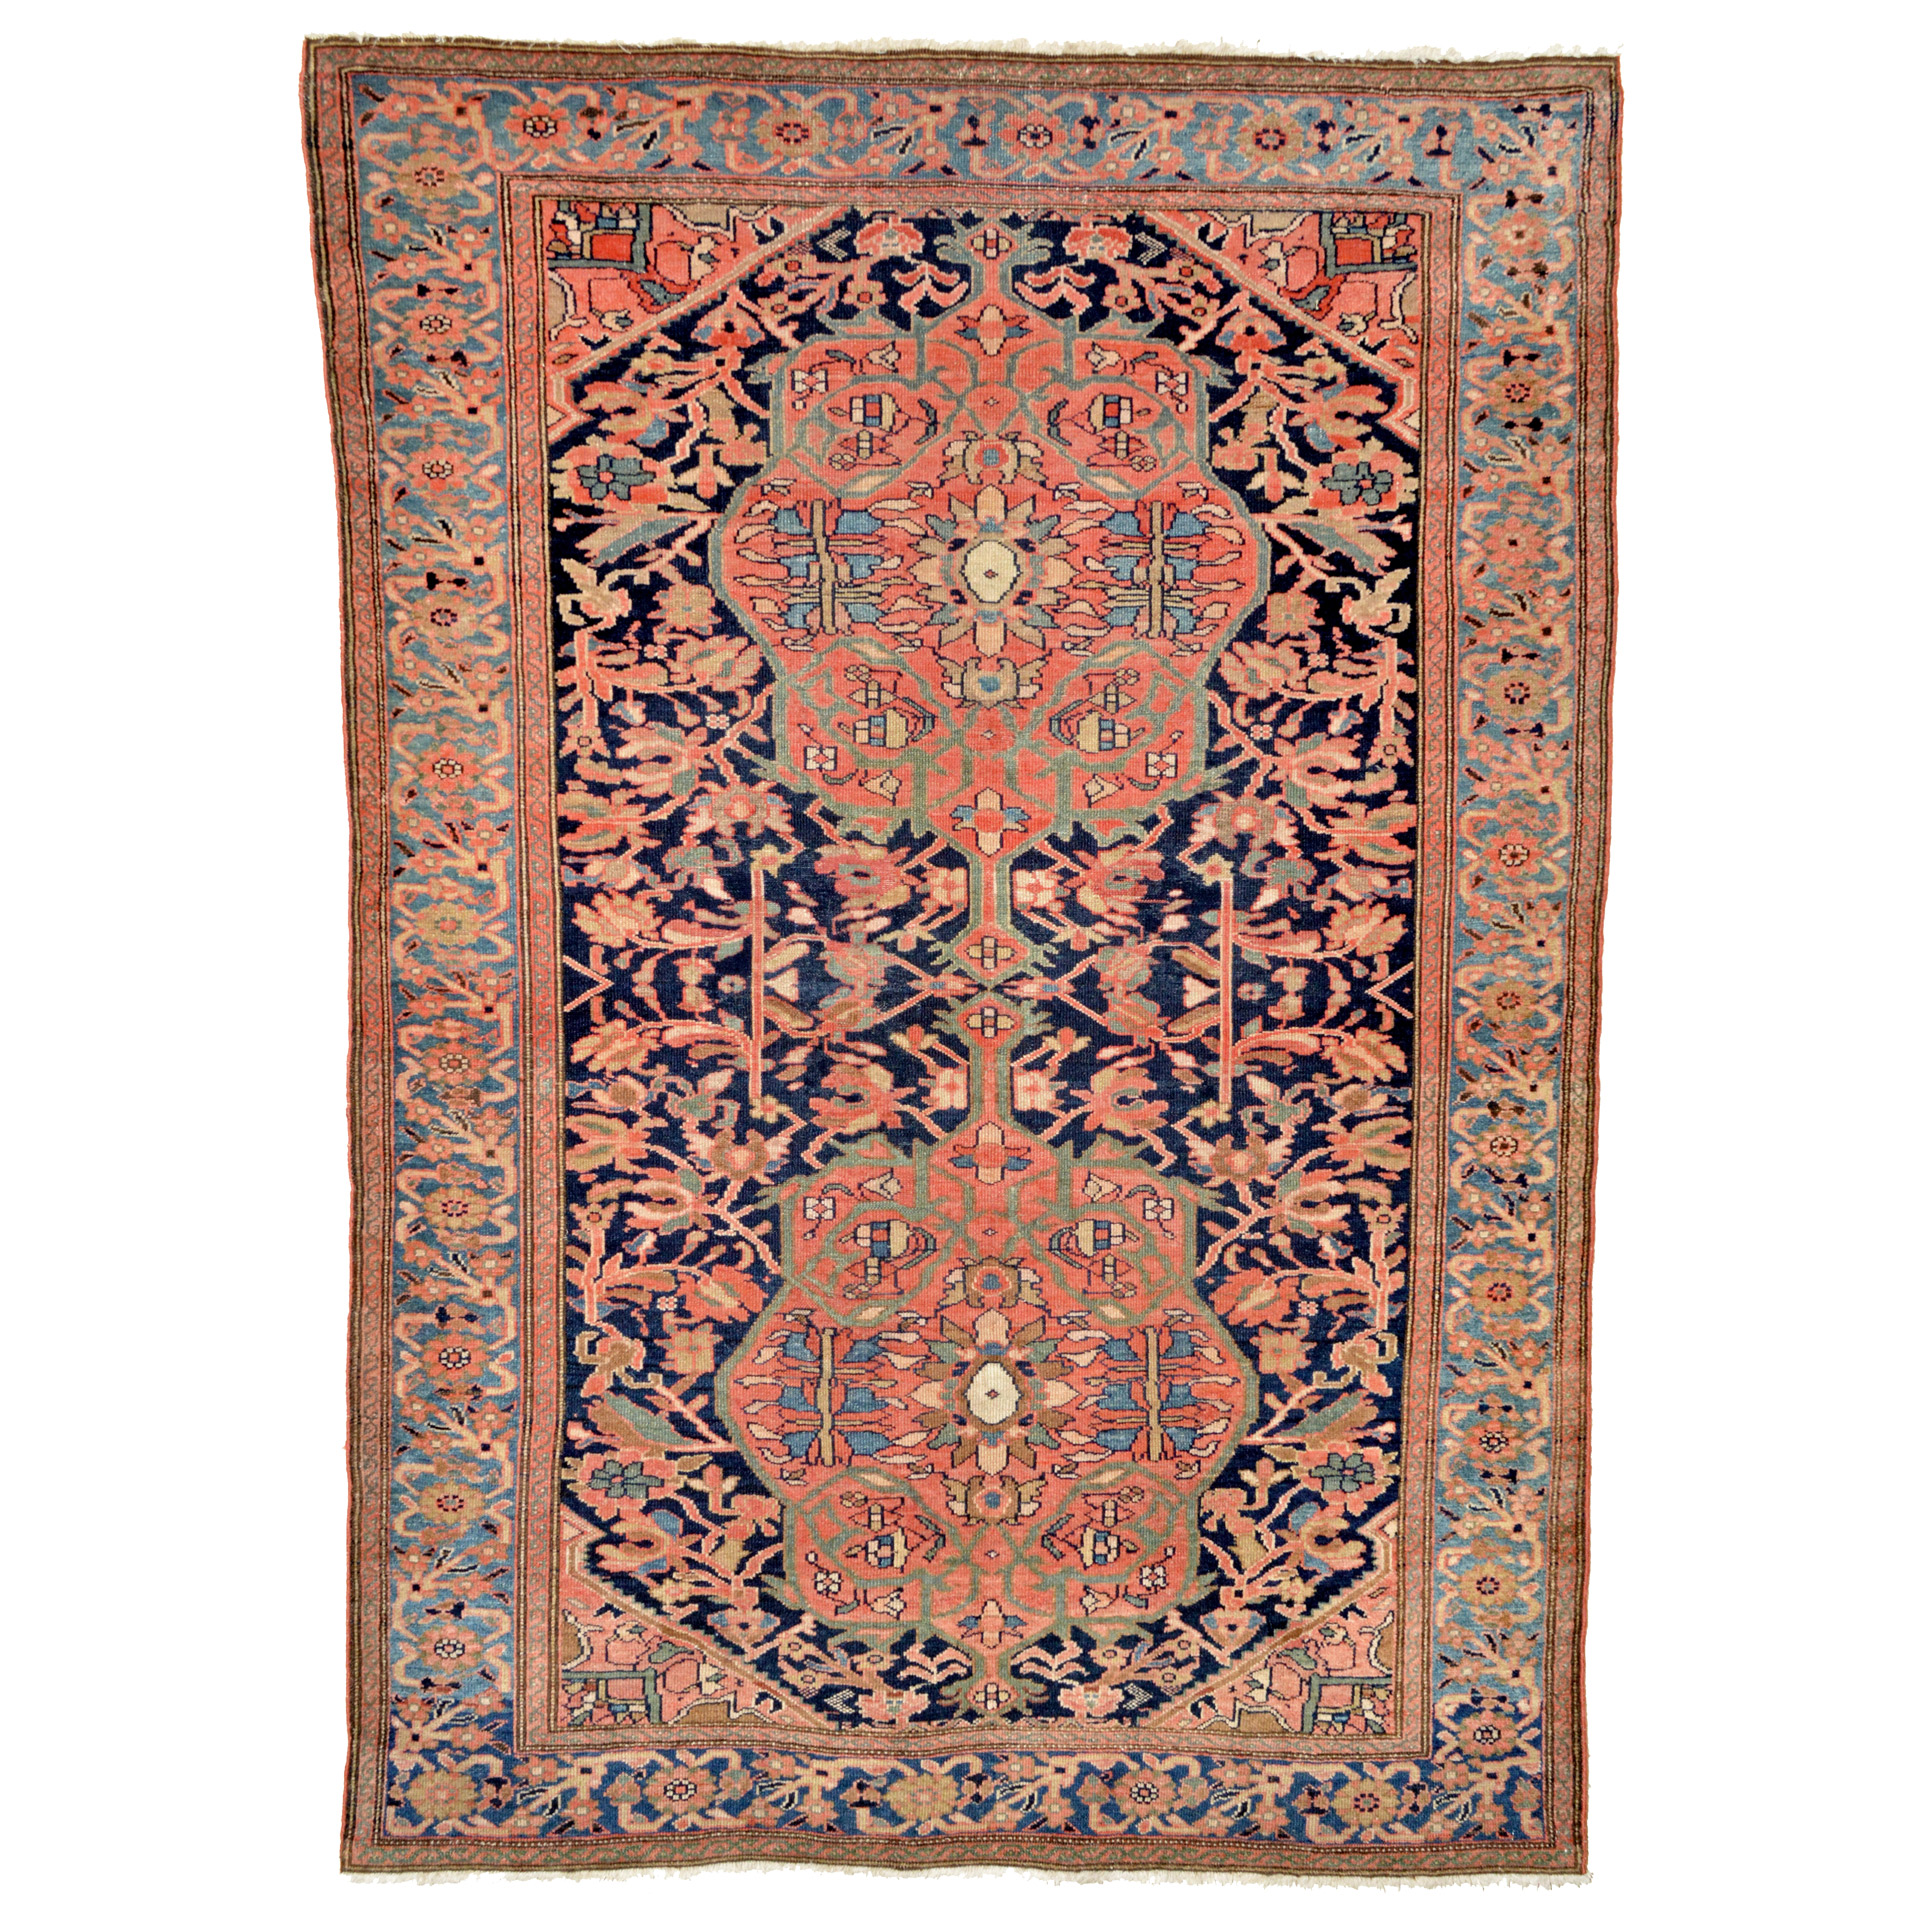 An antique west Persian Melayer rug circa 1900, with two coral color medallions on a navy blue field that is framed by a light blue border. Stylized floral designs are seen through most of the rug. Douglas Stock Gallery is one of New England's most selective dealers i antique Persian rugs, serving Brooklin, Newton, Wellesley, Weston, Needham, Natick and other town in Boston Metrowest and the Boston nNorth Shore and Boston South Shore.